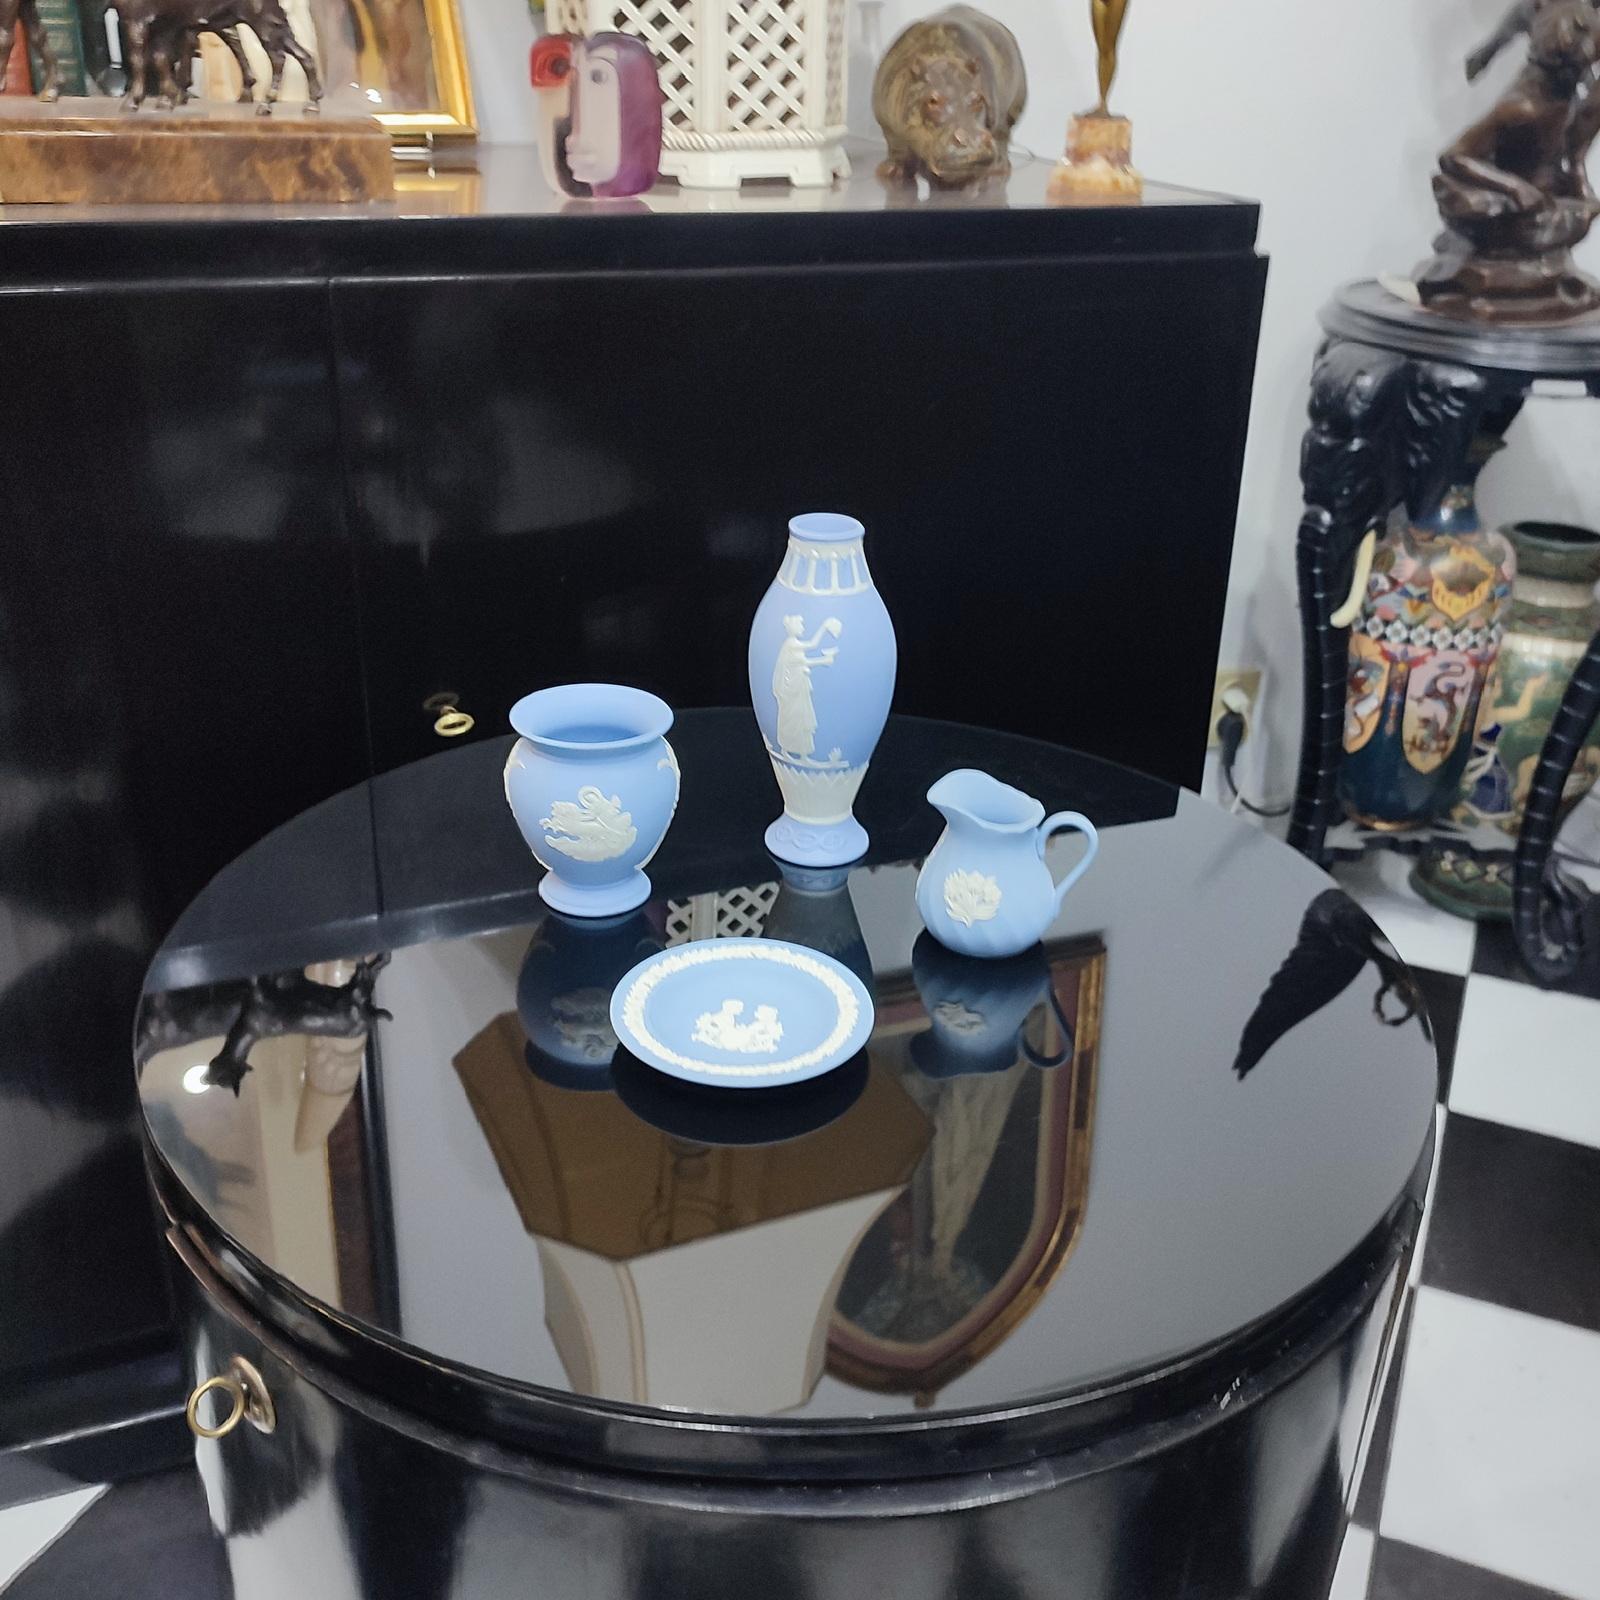 A lovely collection of Wedgwood Jasperware Pale Blue four pieces, comprising a large vase, a short one, a mall pitcher (milk) and a small round tray. Made by Wedgwood in England in 1980s, marked/stamped on base.

Enter code FREESHIP at checkout to